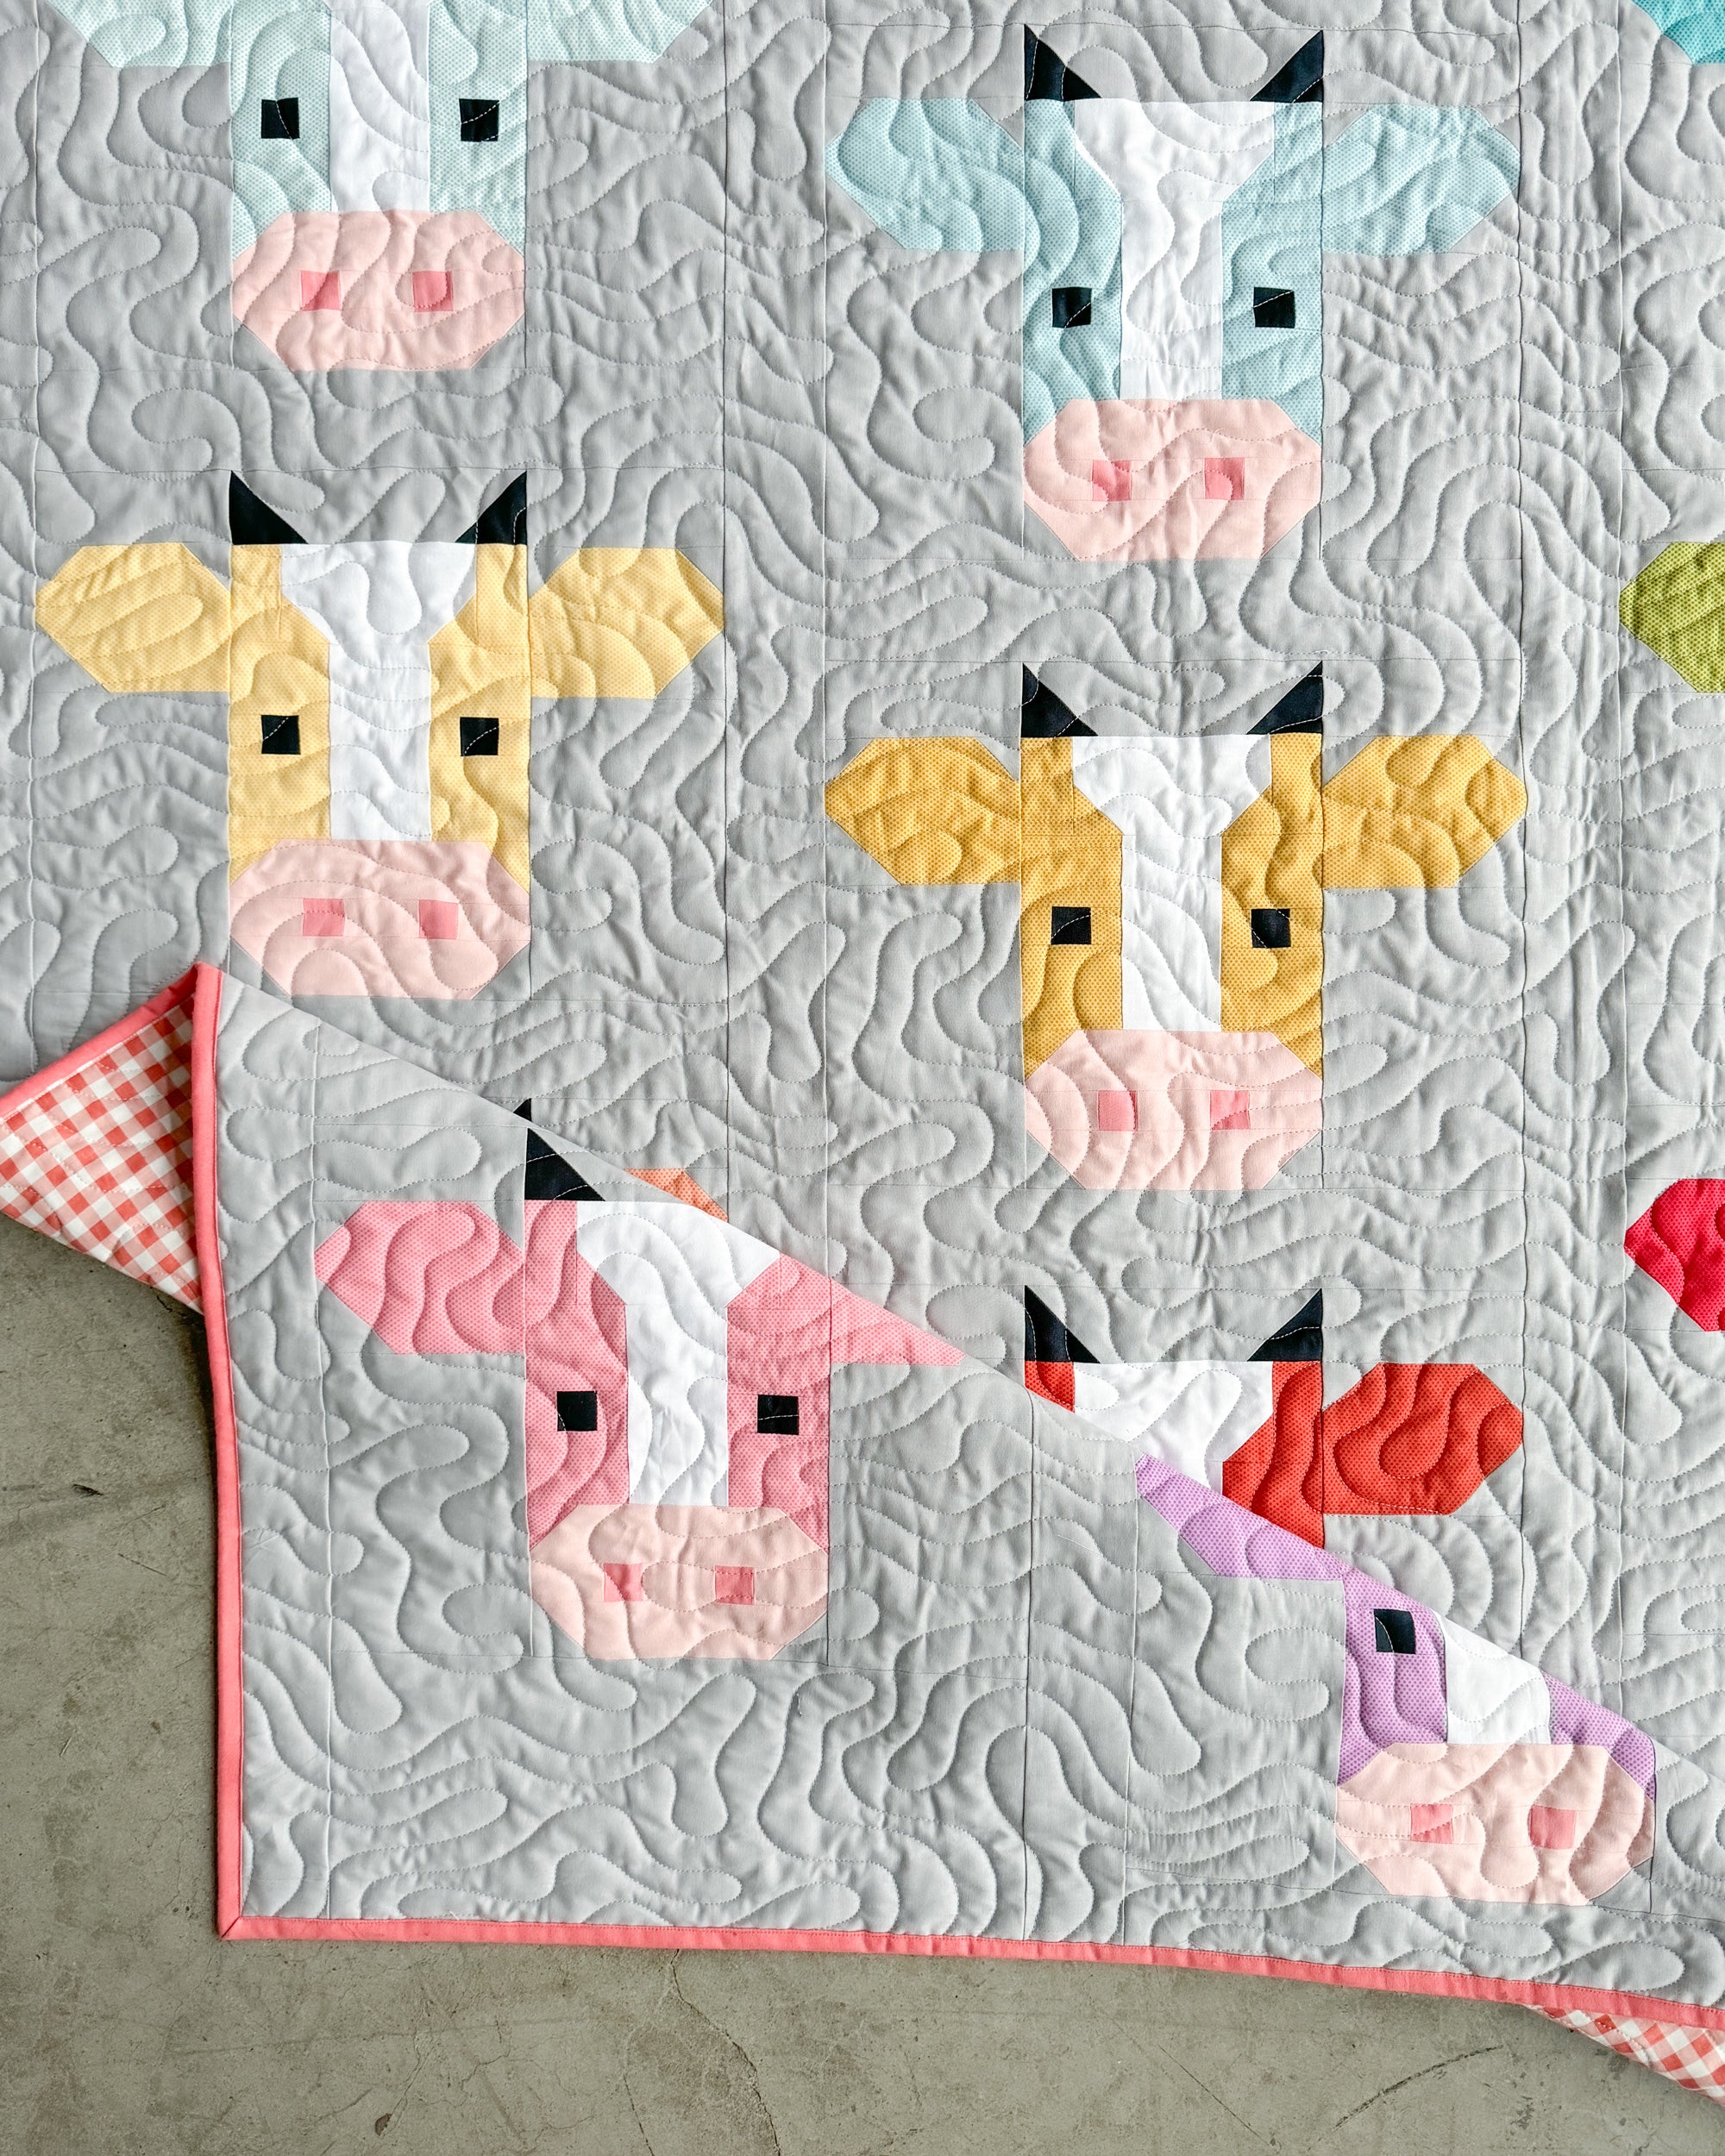 Annabelle Quilt Pattern - A fun and modern cow quilt pattern by Cotton and Joy